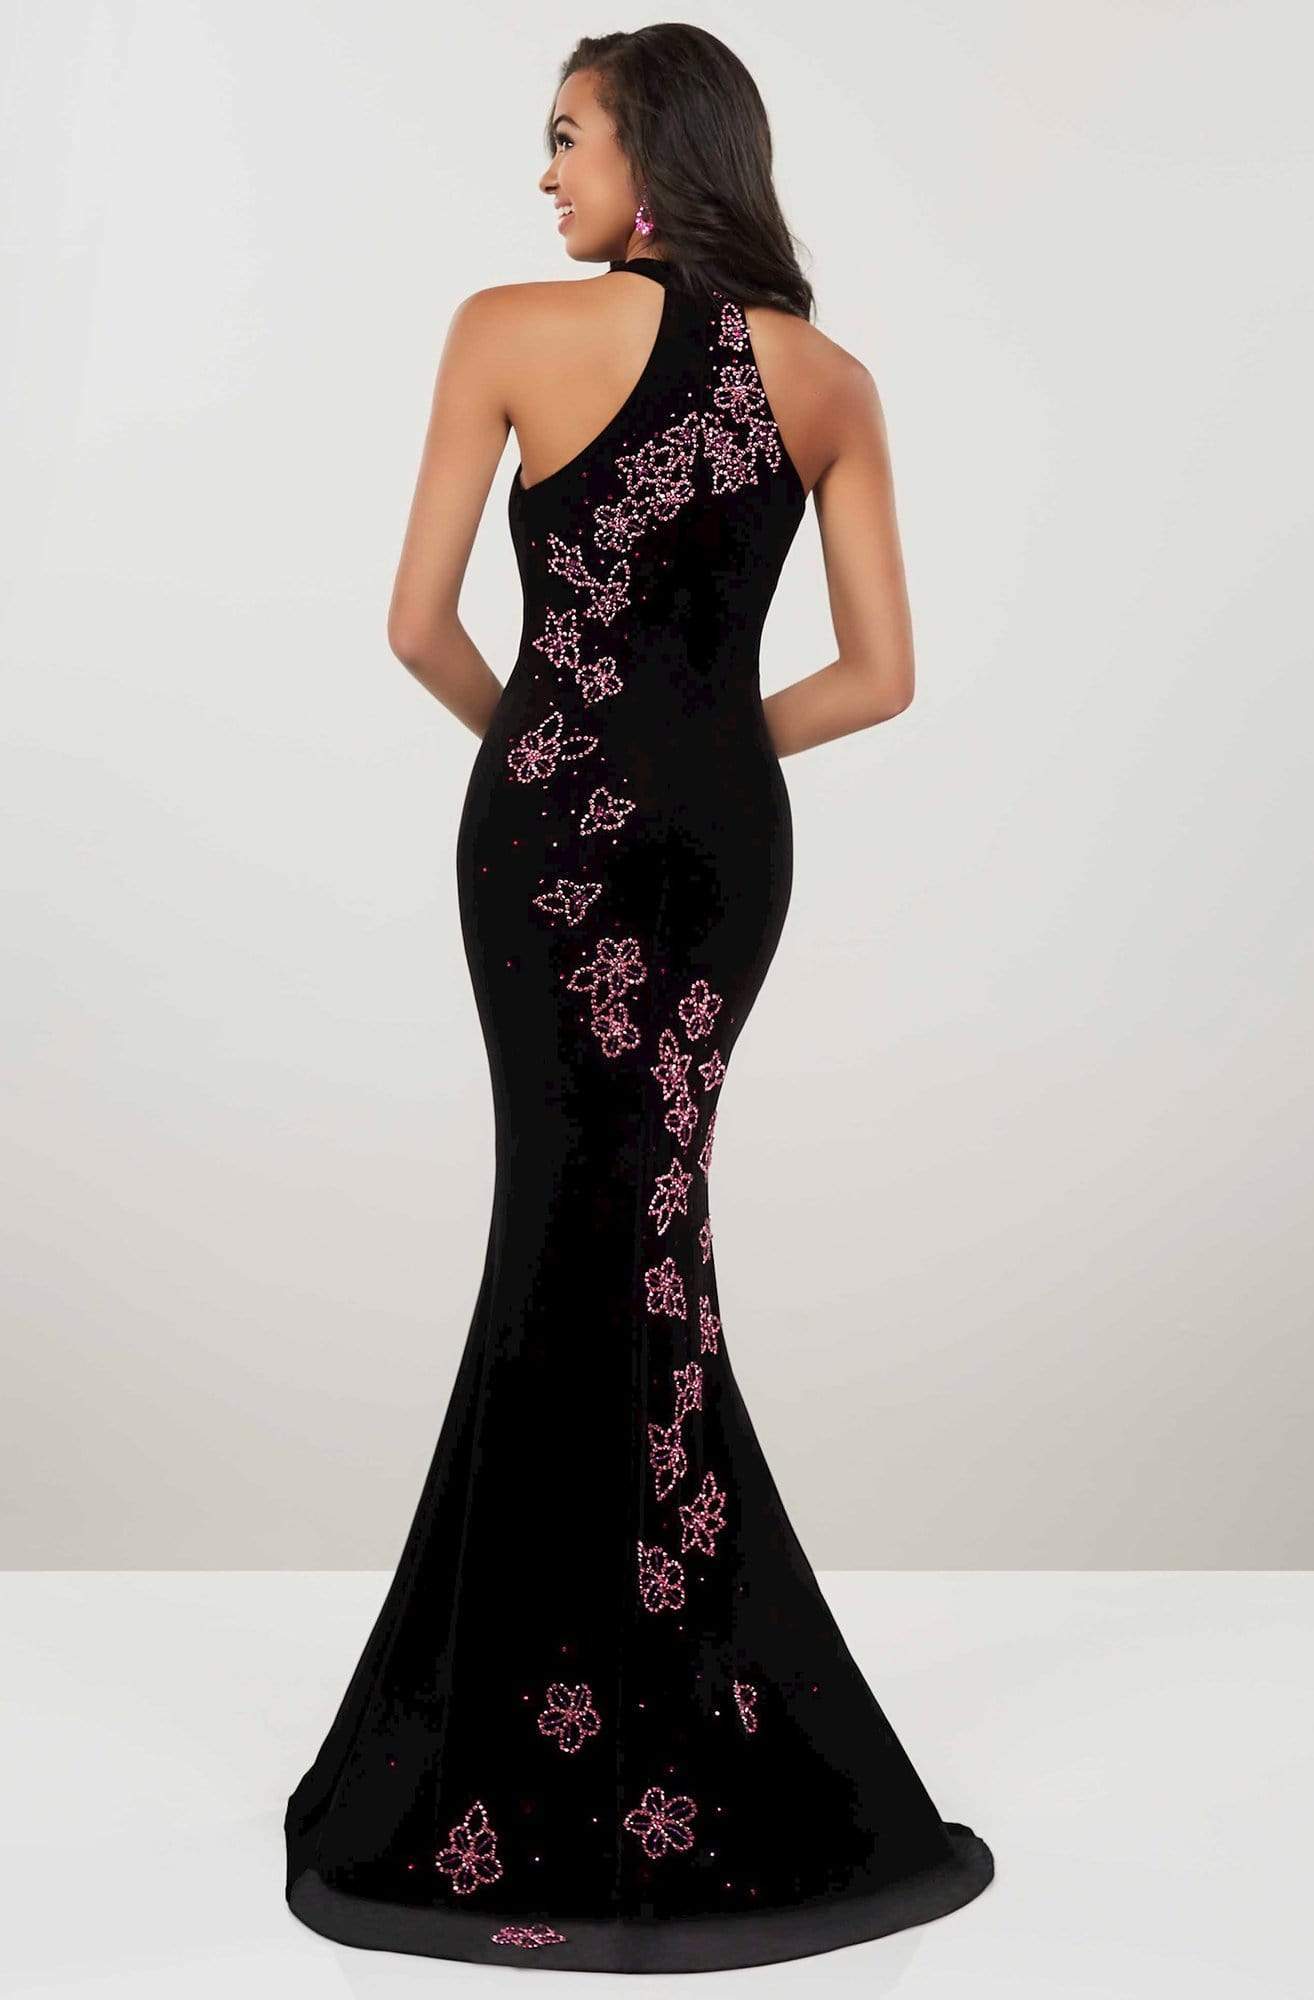 Panoply - 14948 Beaded Floral Plunging Halter Dress Special Occasion Dress 0 / Black/Fuchsia